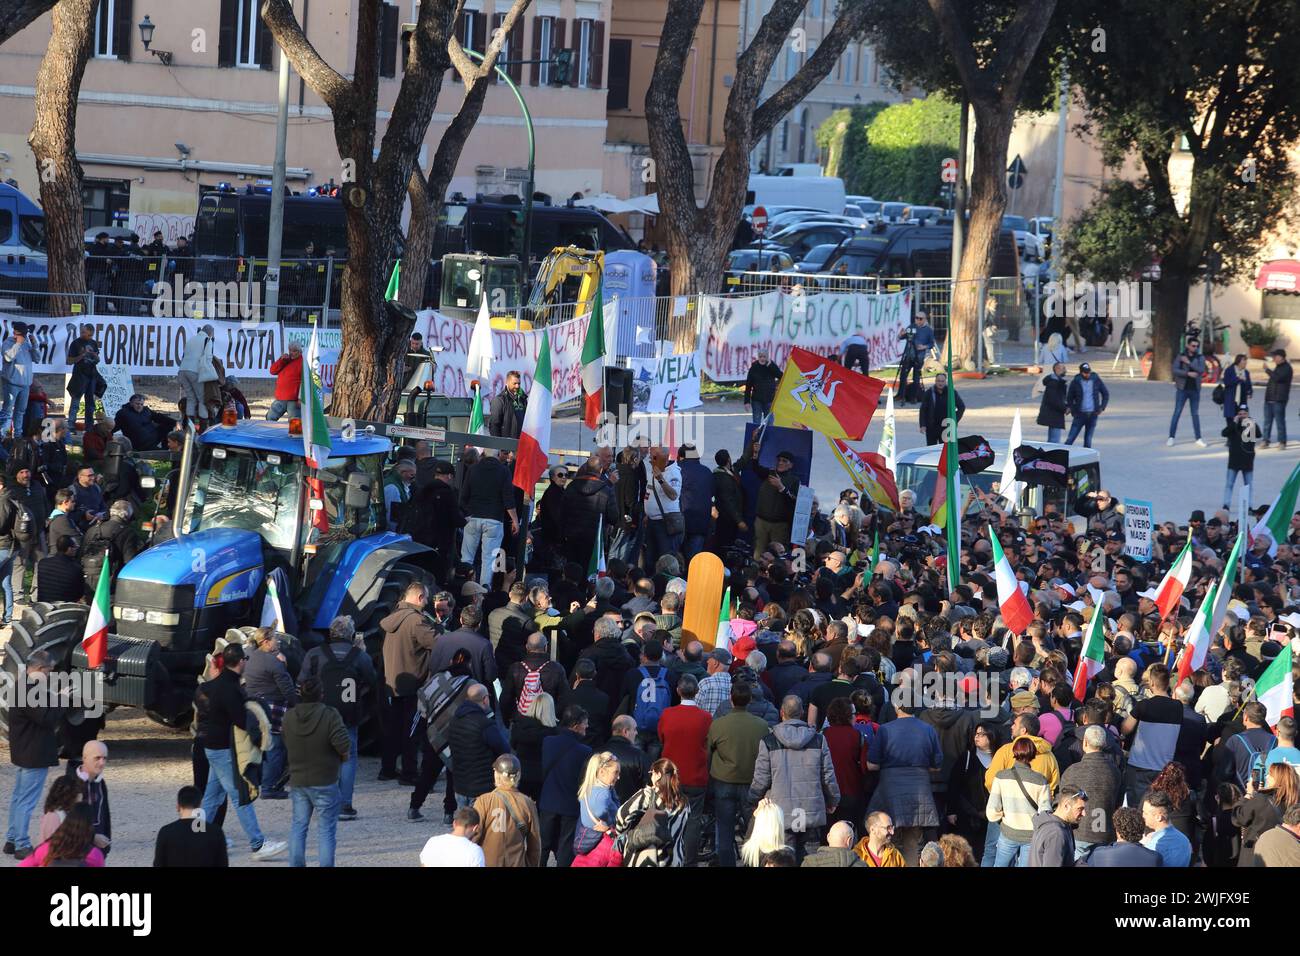 The farmers' protest in the Italian capital, the tractors arrived at the Circus Maximus. Rome, Italy. February 15, 2024. ANTONIO NARDELLI / ALAMY LIVE NEWS Stock Photo